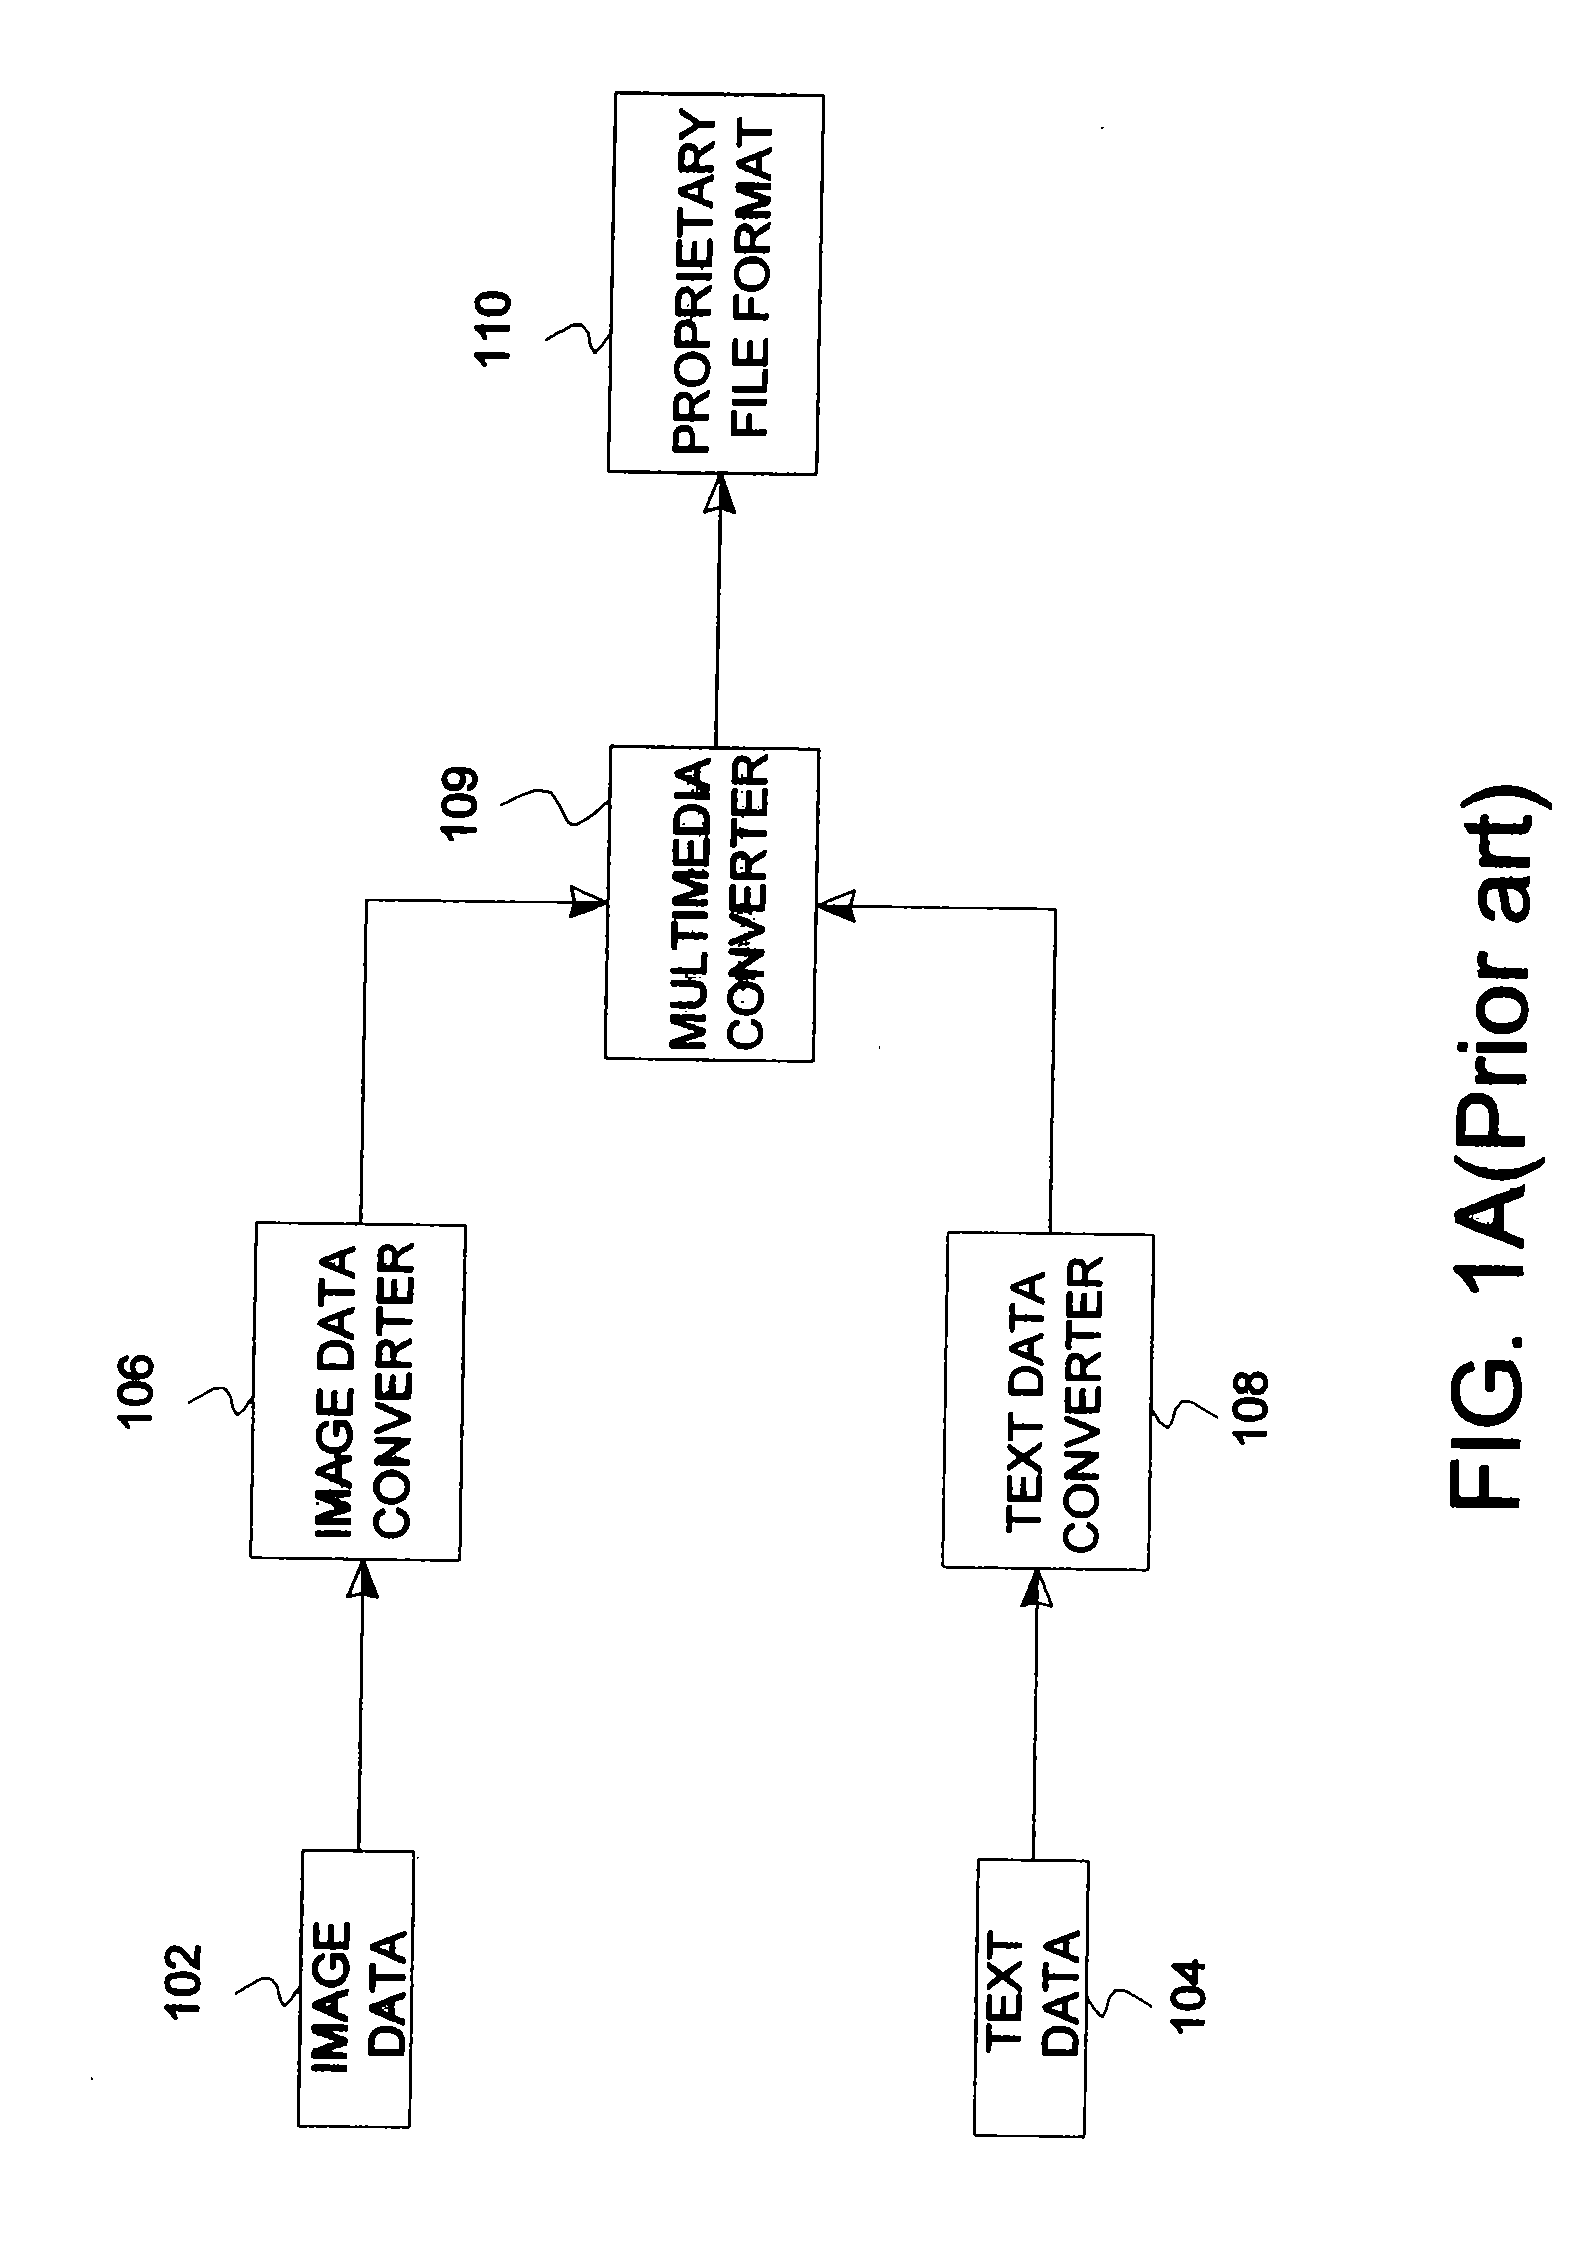 Template-based multimedia editor and editing method thereof